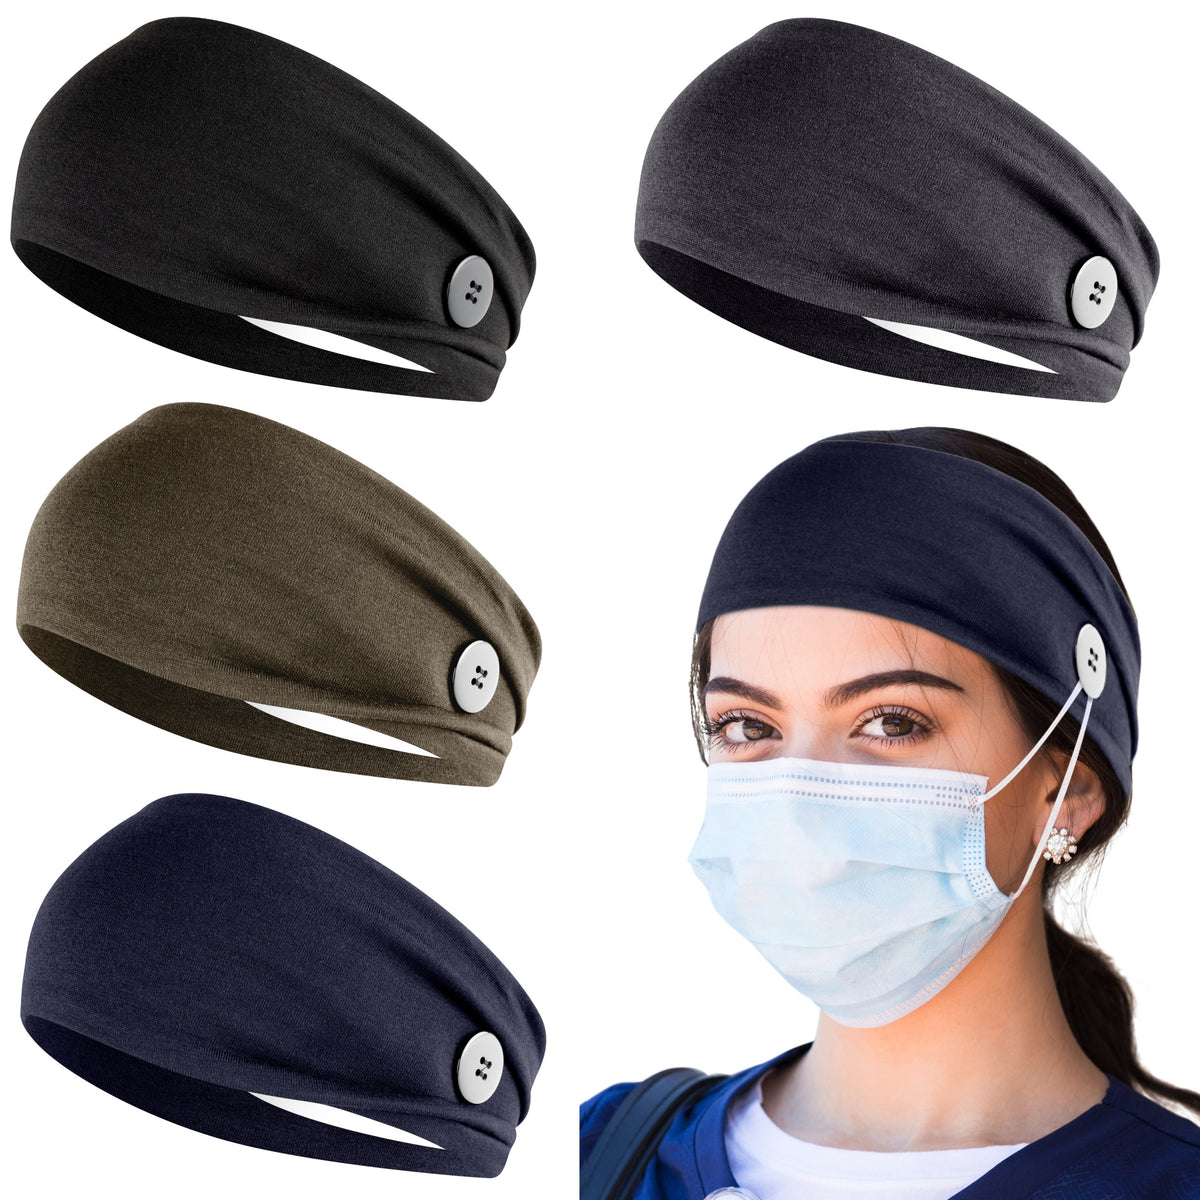 Headbands With Buttons For Mask, Nurse Headbands Non Slip With Ear Savers - Classic - First Lifesaver